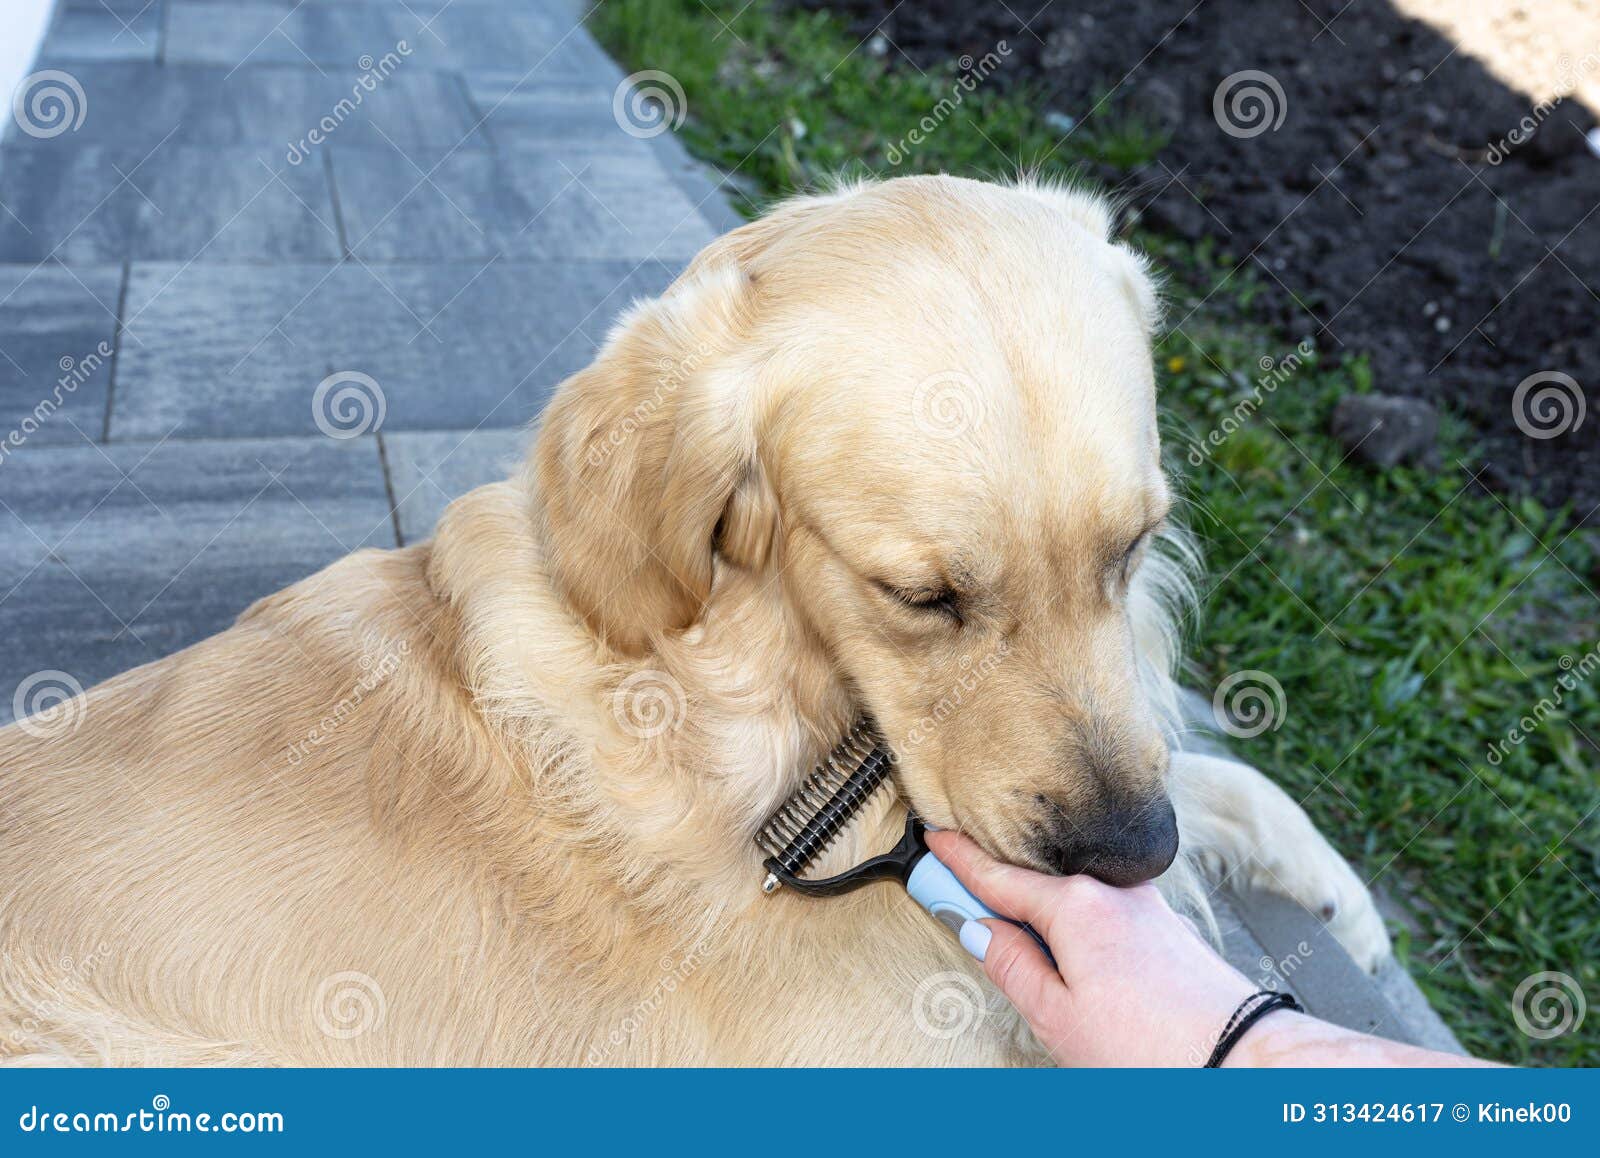 combing the undercoat with a special comb of a young male golden retriever sitting on a terrace.